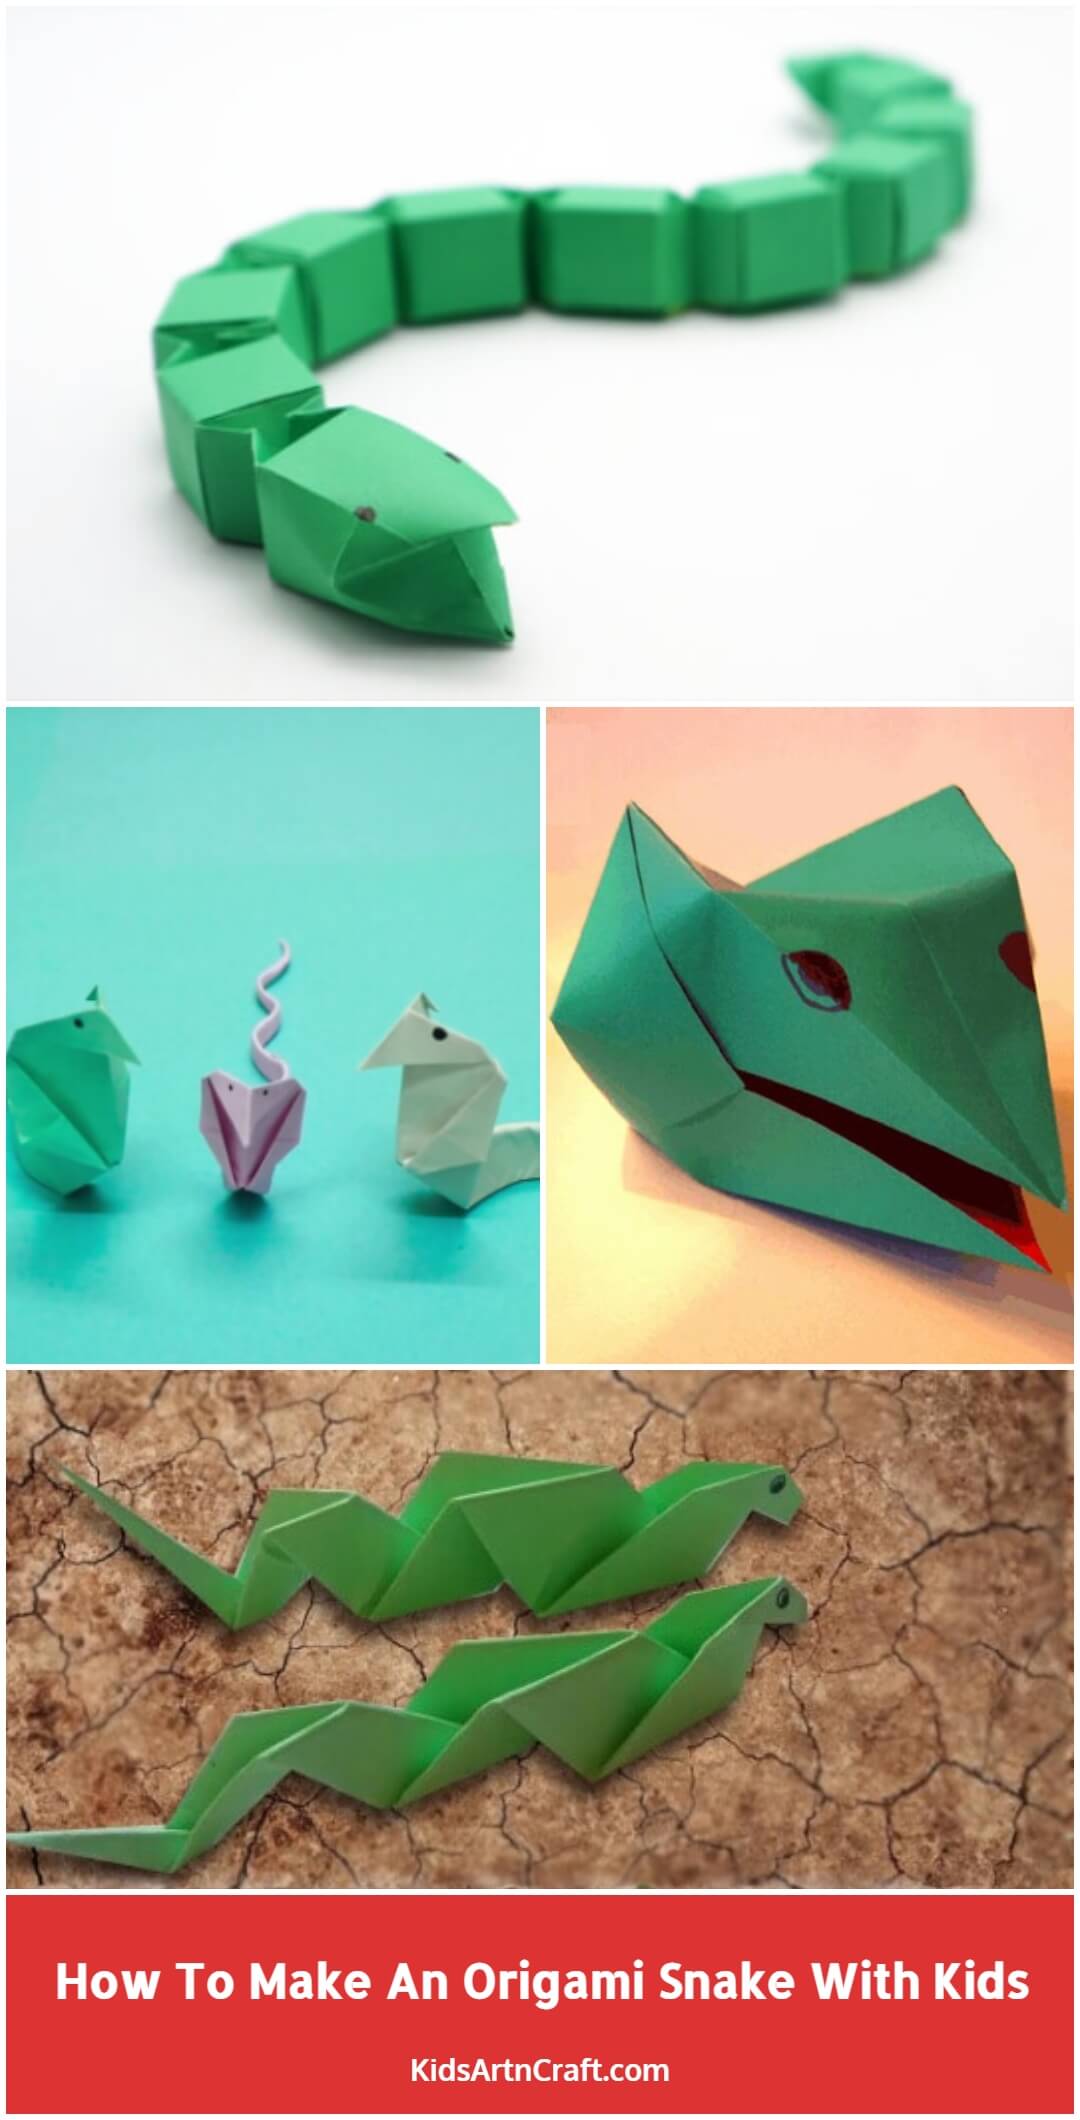 How To Make An Origami Snake With Kids